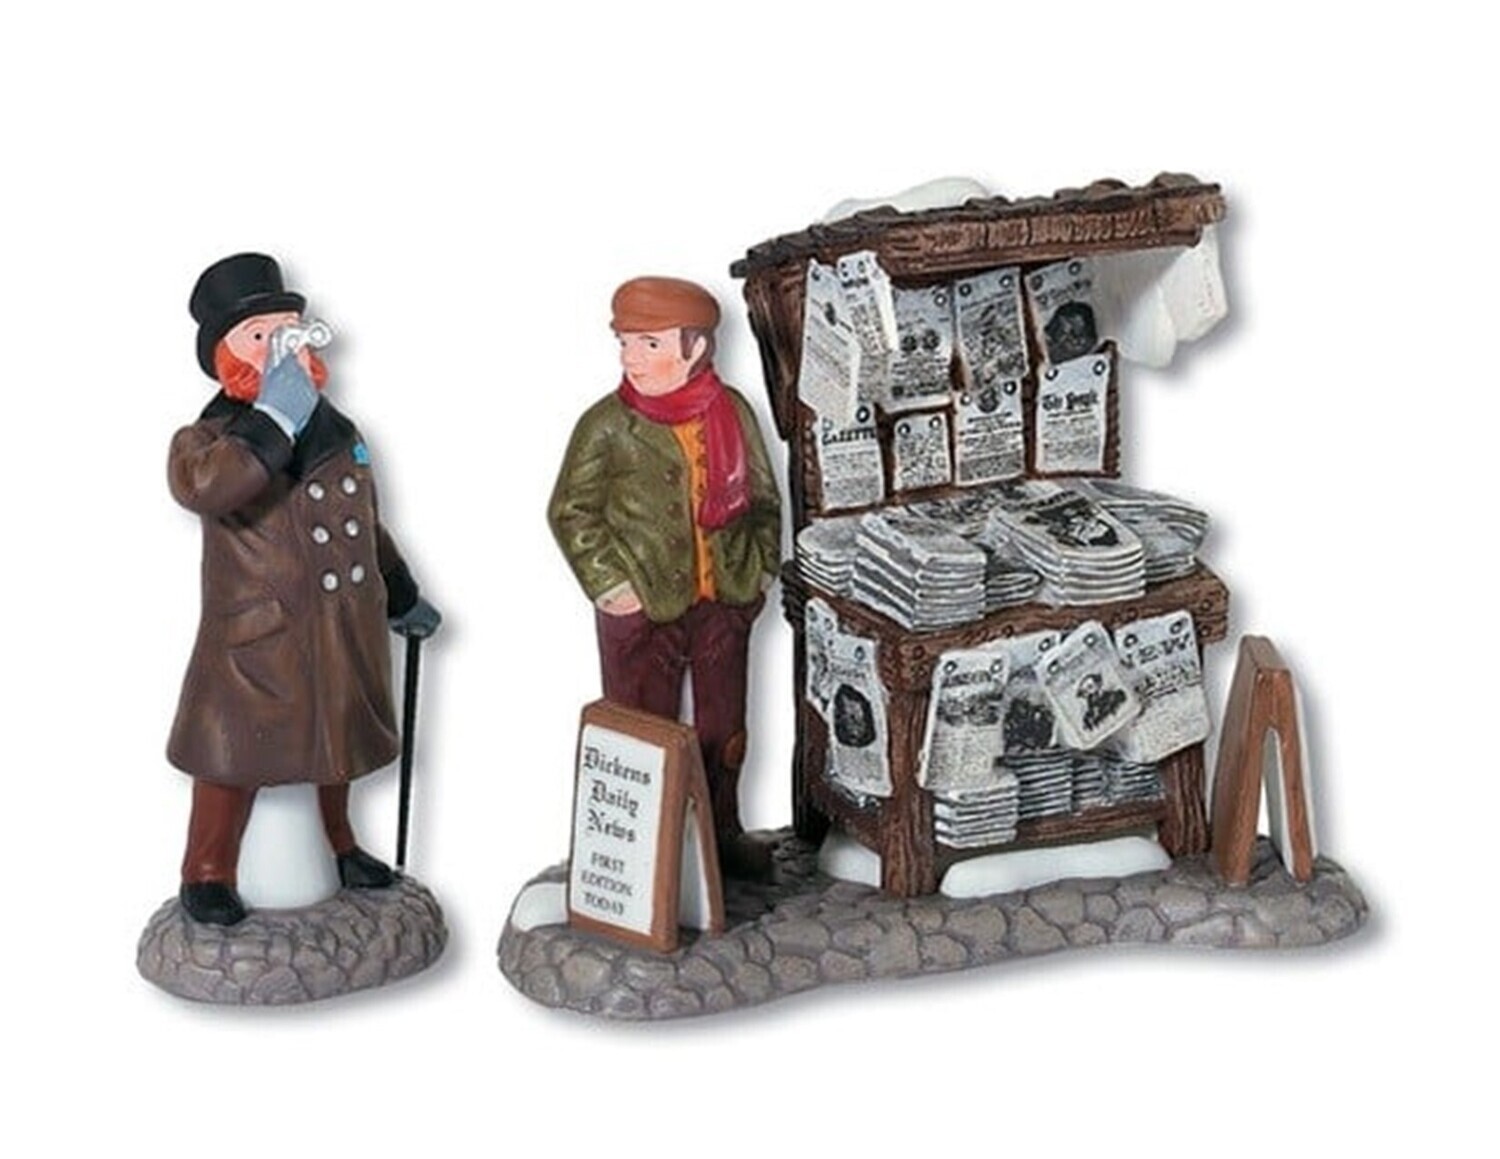 Department 56 Dickens Village "London Newspaper Stand" Set of 2 (56.5856)